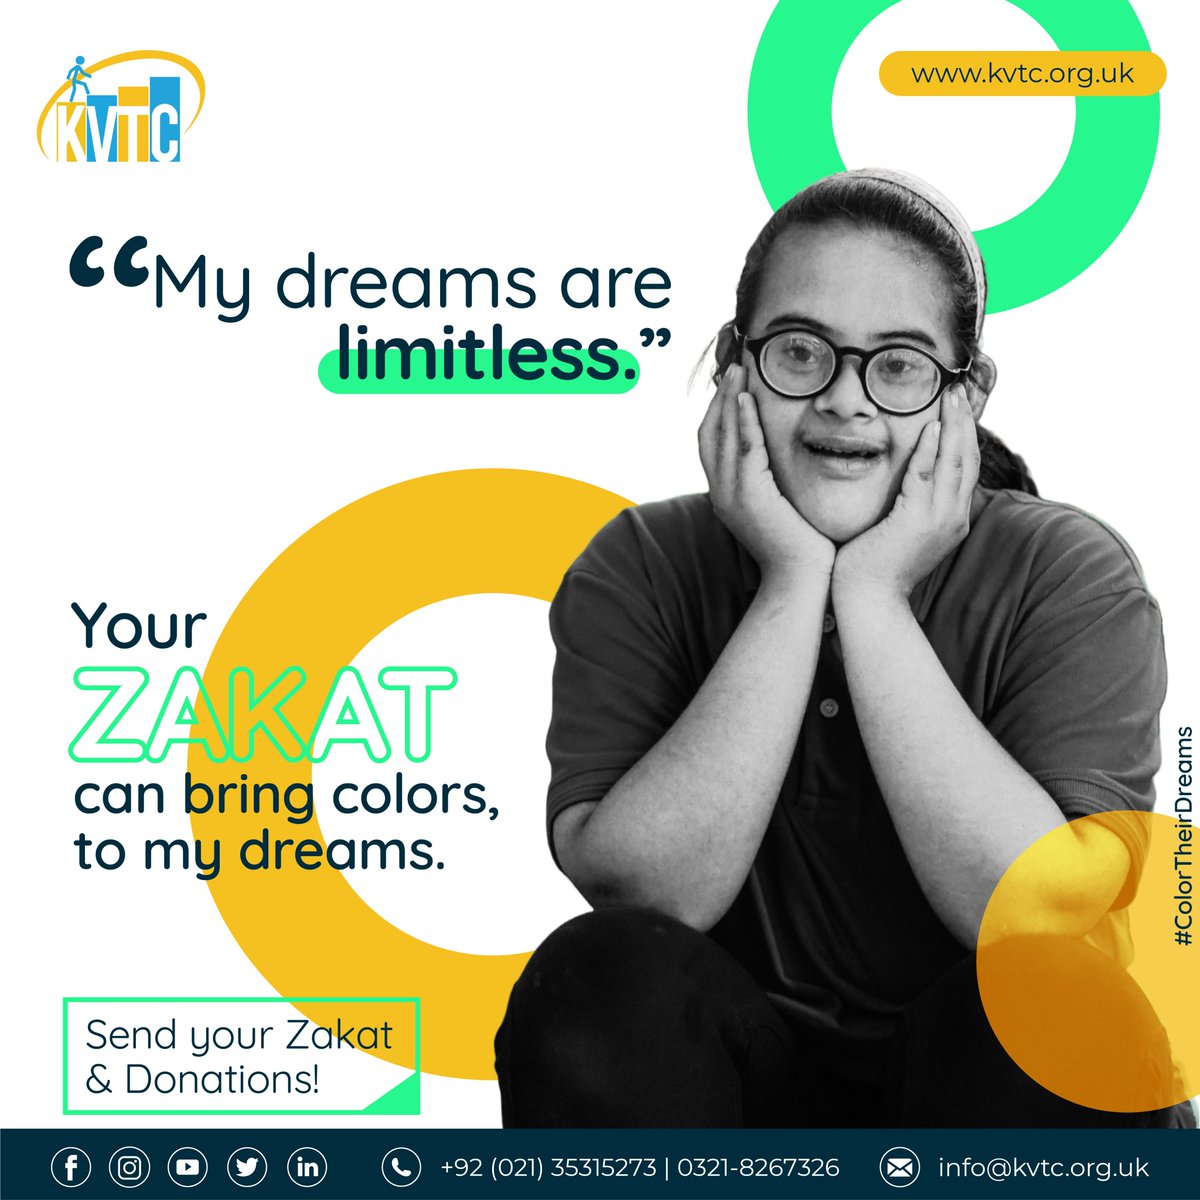 Help us break down barriers and create opportunities for those with special needs. Together with love and compassion, we can make their dreams come true. 

Your ZAKAT can bring colors to their dreams.🤗❤️
kvtc.org.uk/donations/

#ColorTheirDreams #QabilHaiPakistan #GiveYourZakat